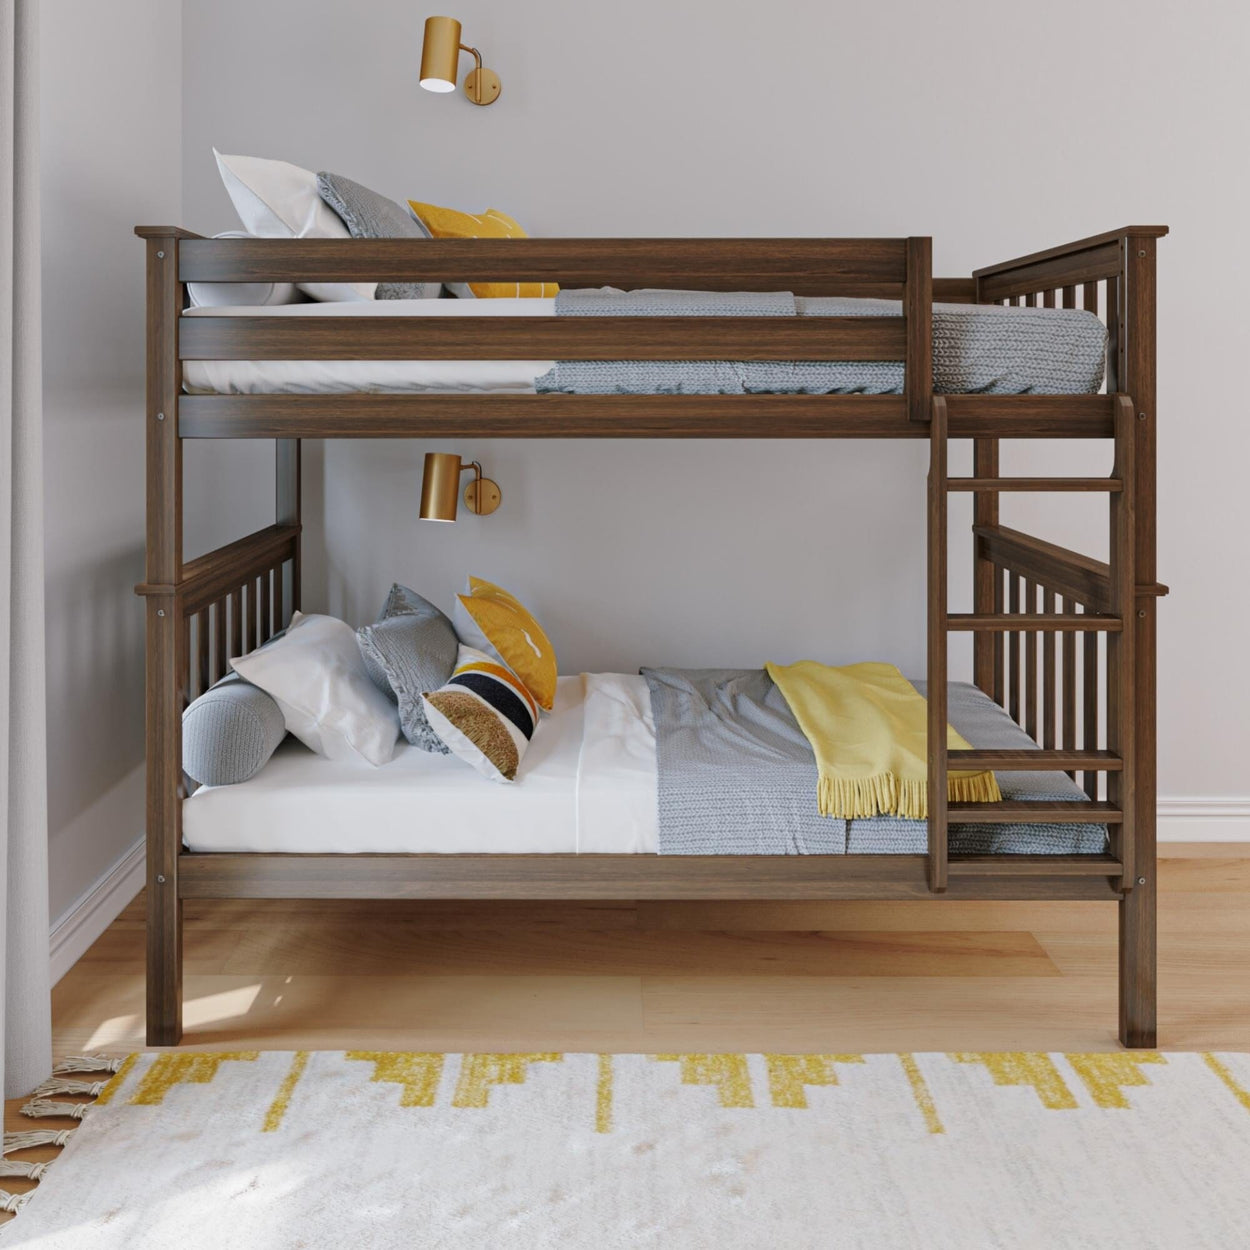 180201-008 : Bunk Beds Classic Twin over Twin Bunk Bed, Walnut